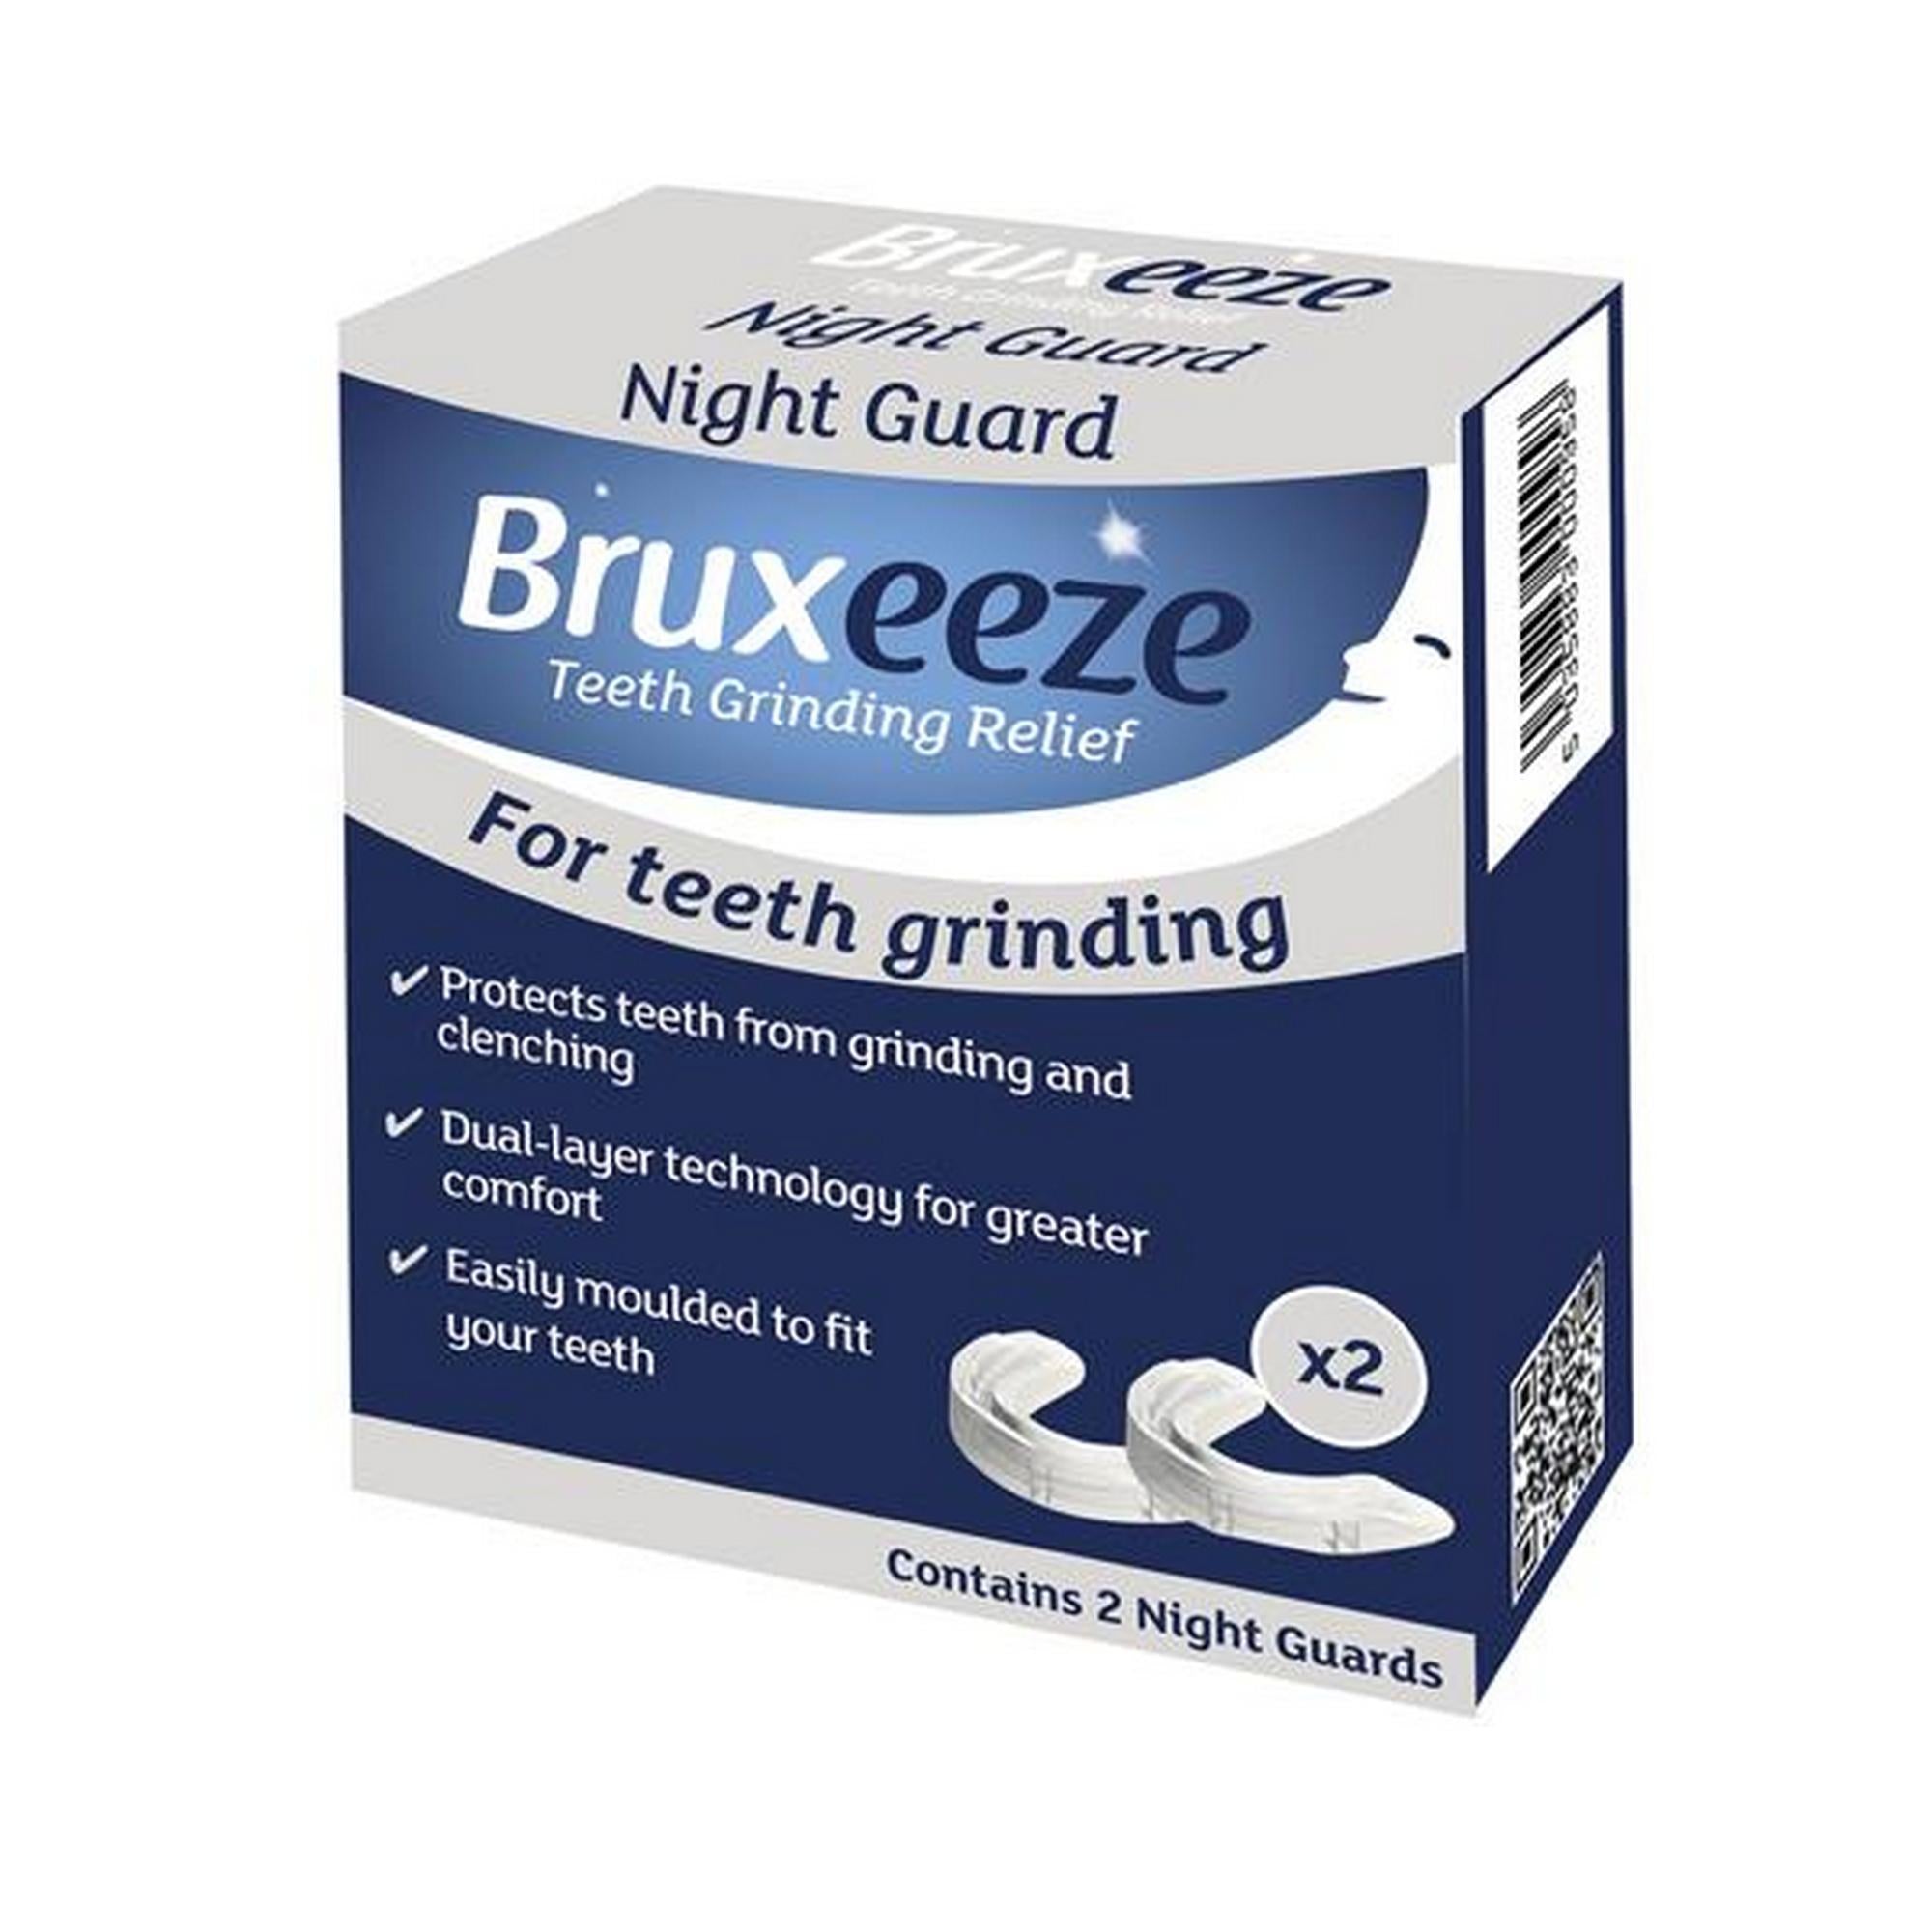 Gutter Protects Tooth Anti Bruxisme Against L' Wear Of Teething Grincements